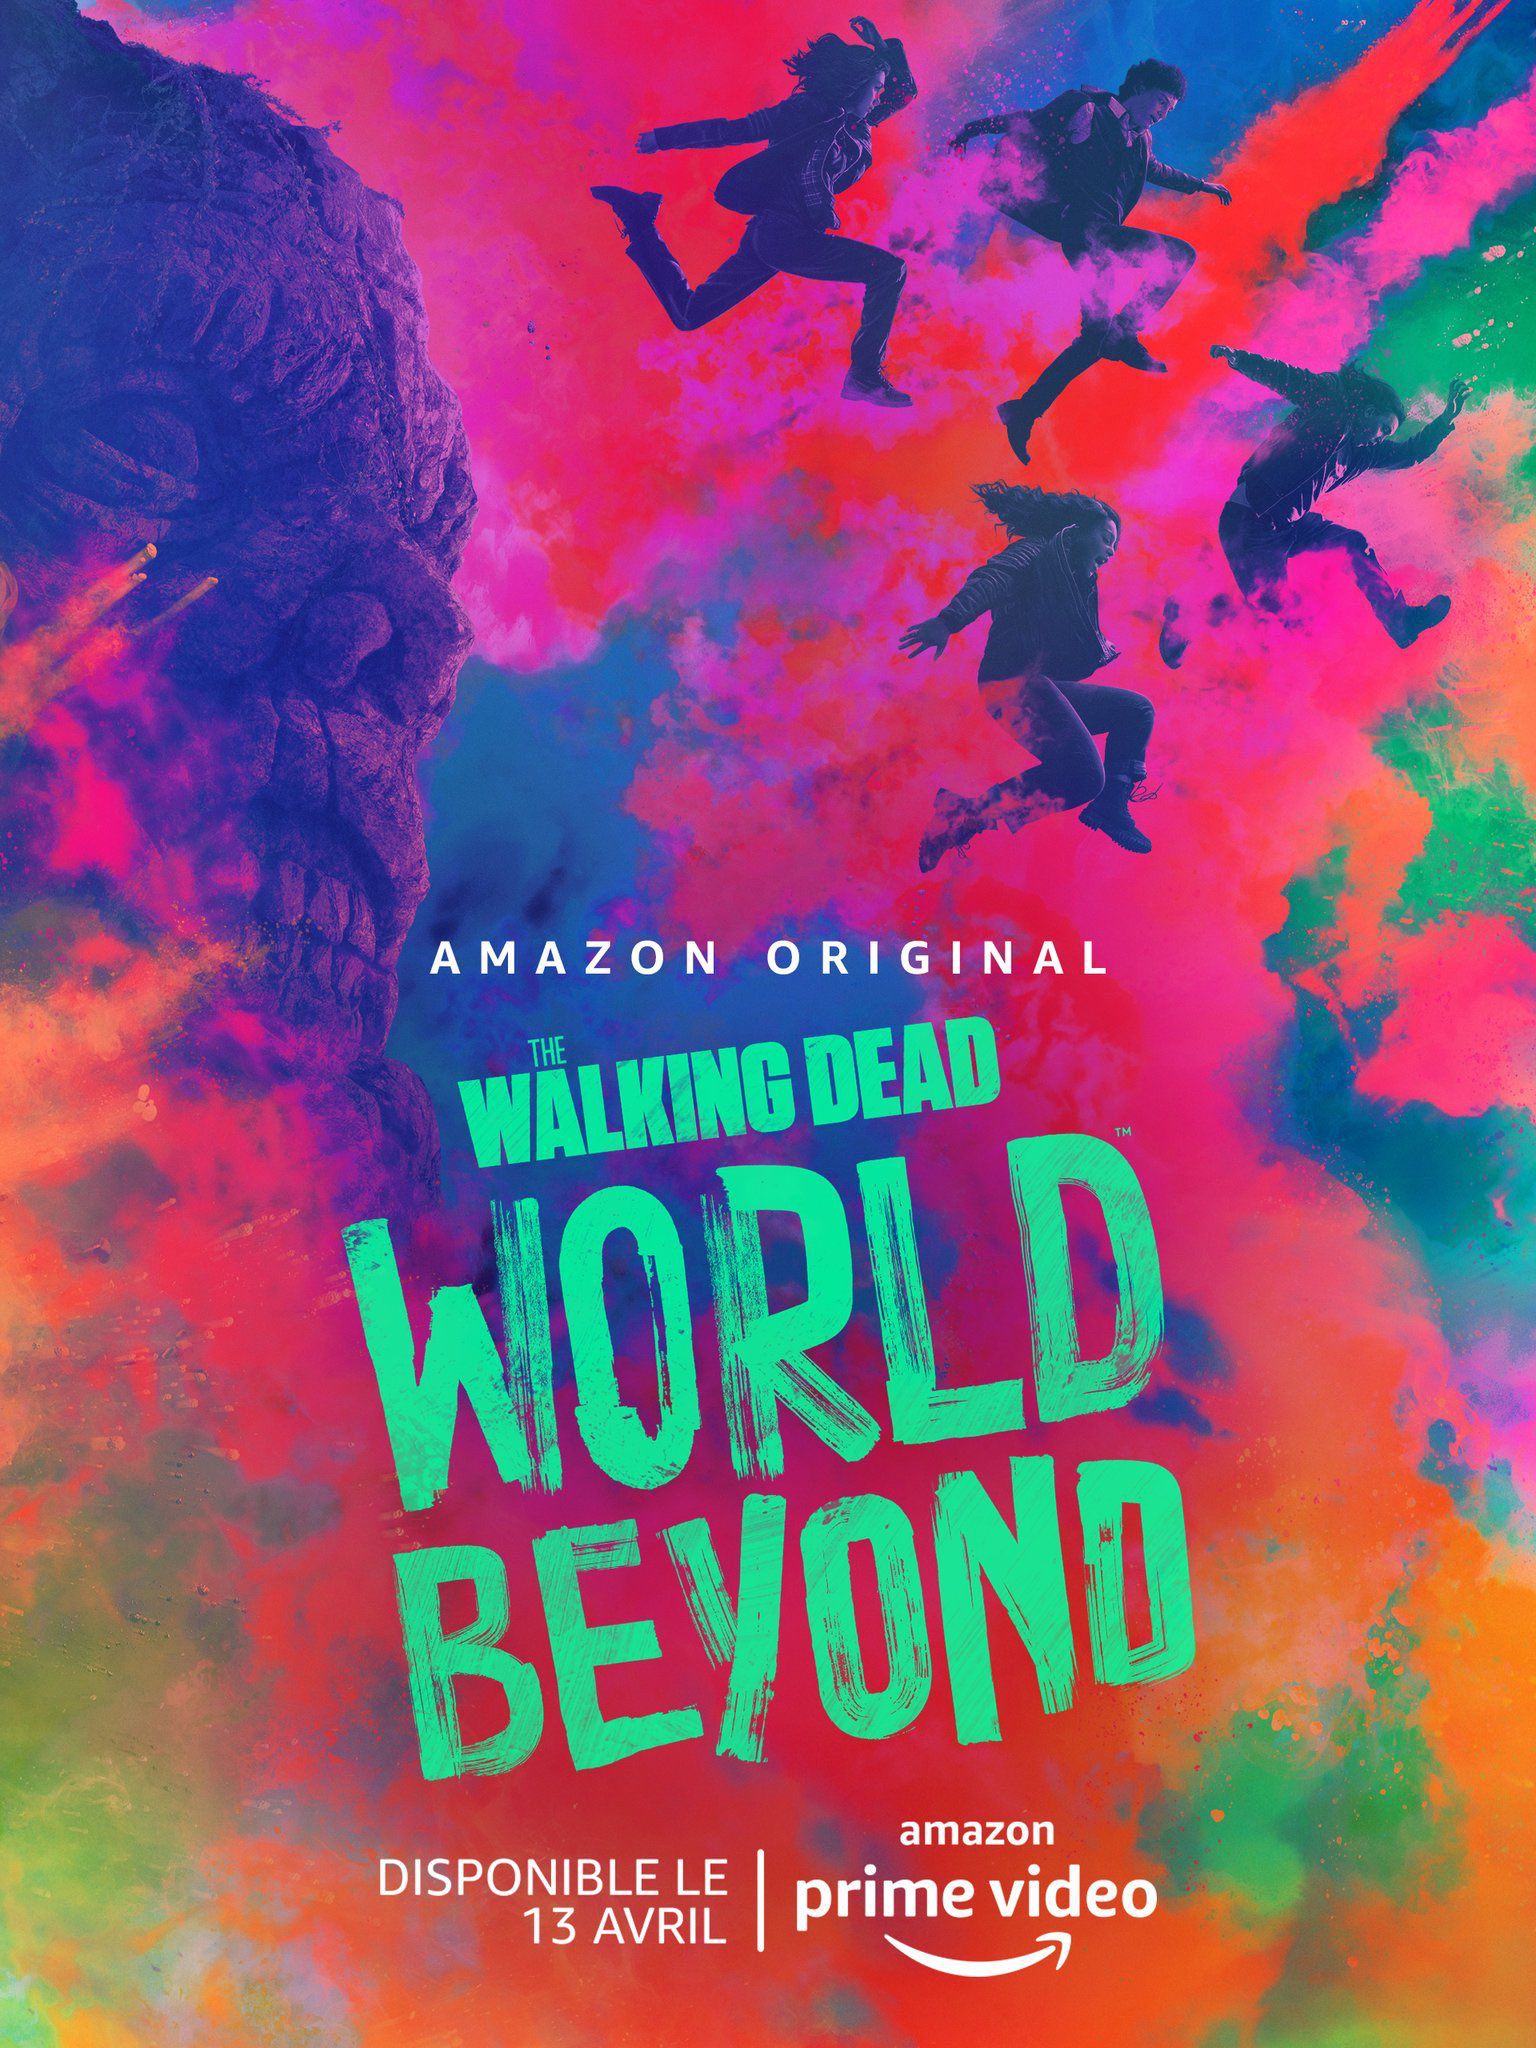 The Walking Dead: World Beyond - Série (2020) streaming VF gratuit complet